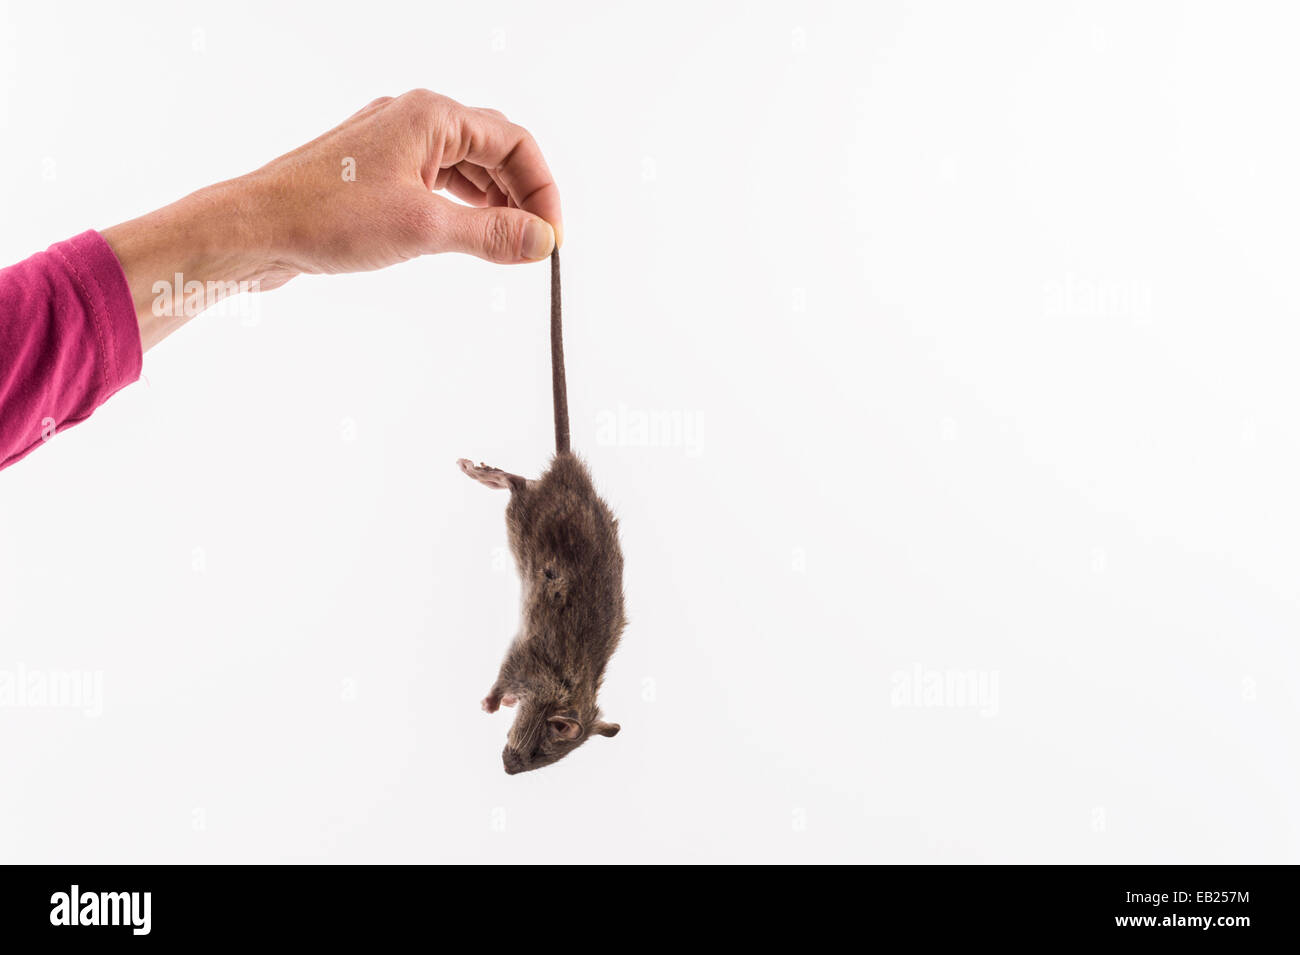 Woman's hand holding dead mouse by tail (model released) Stock Photo